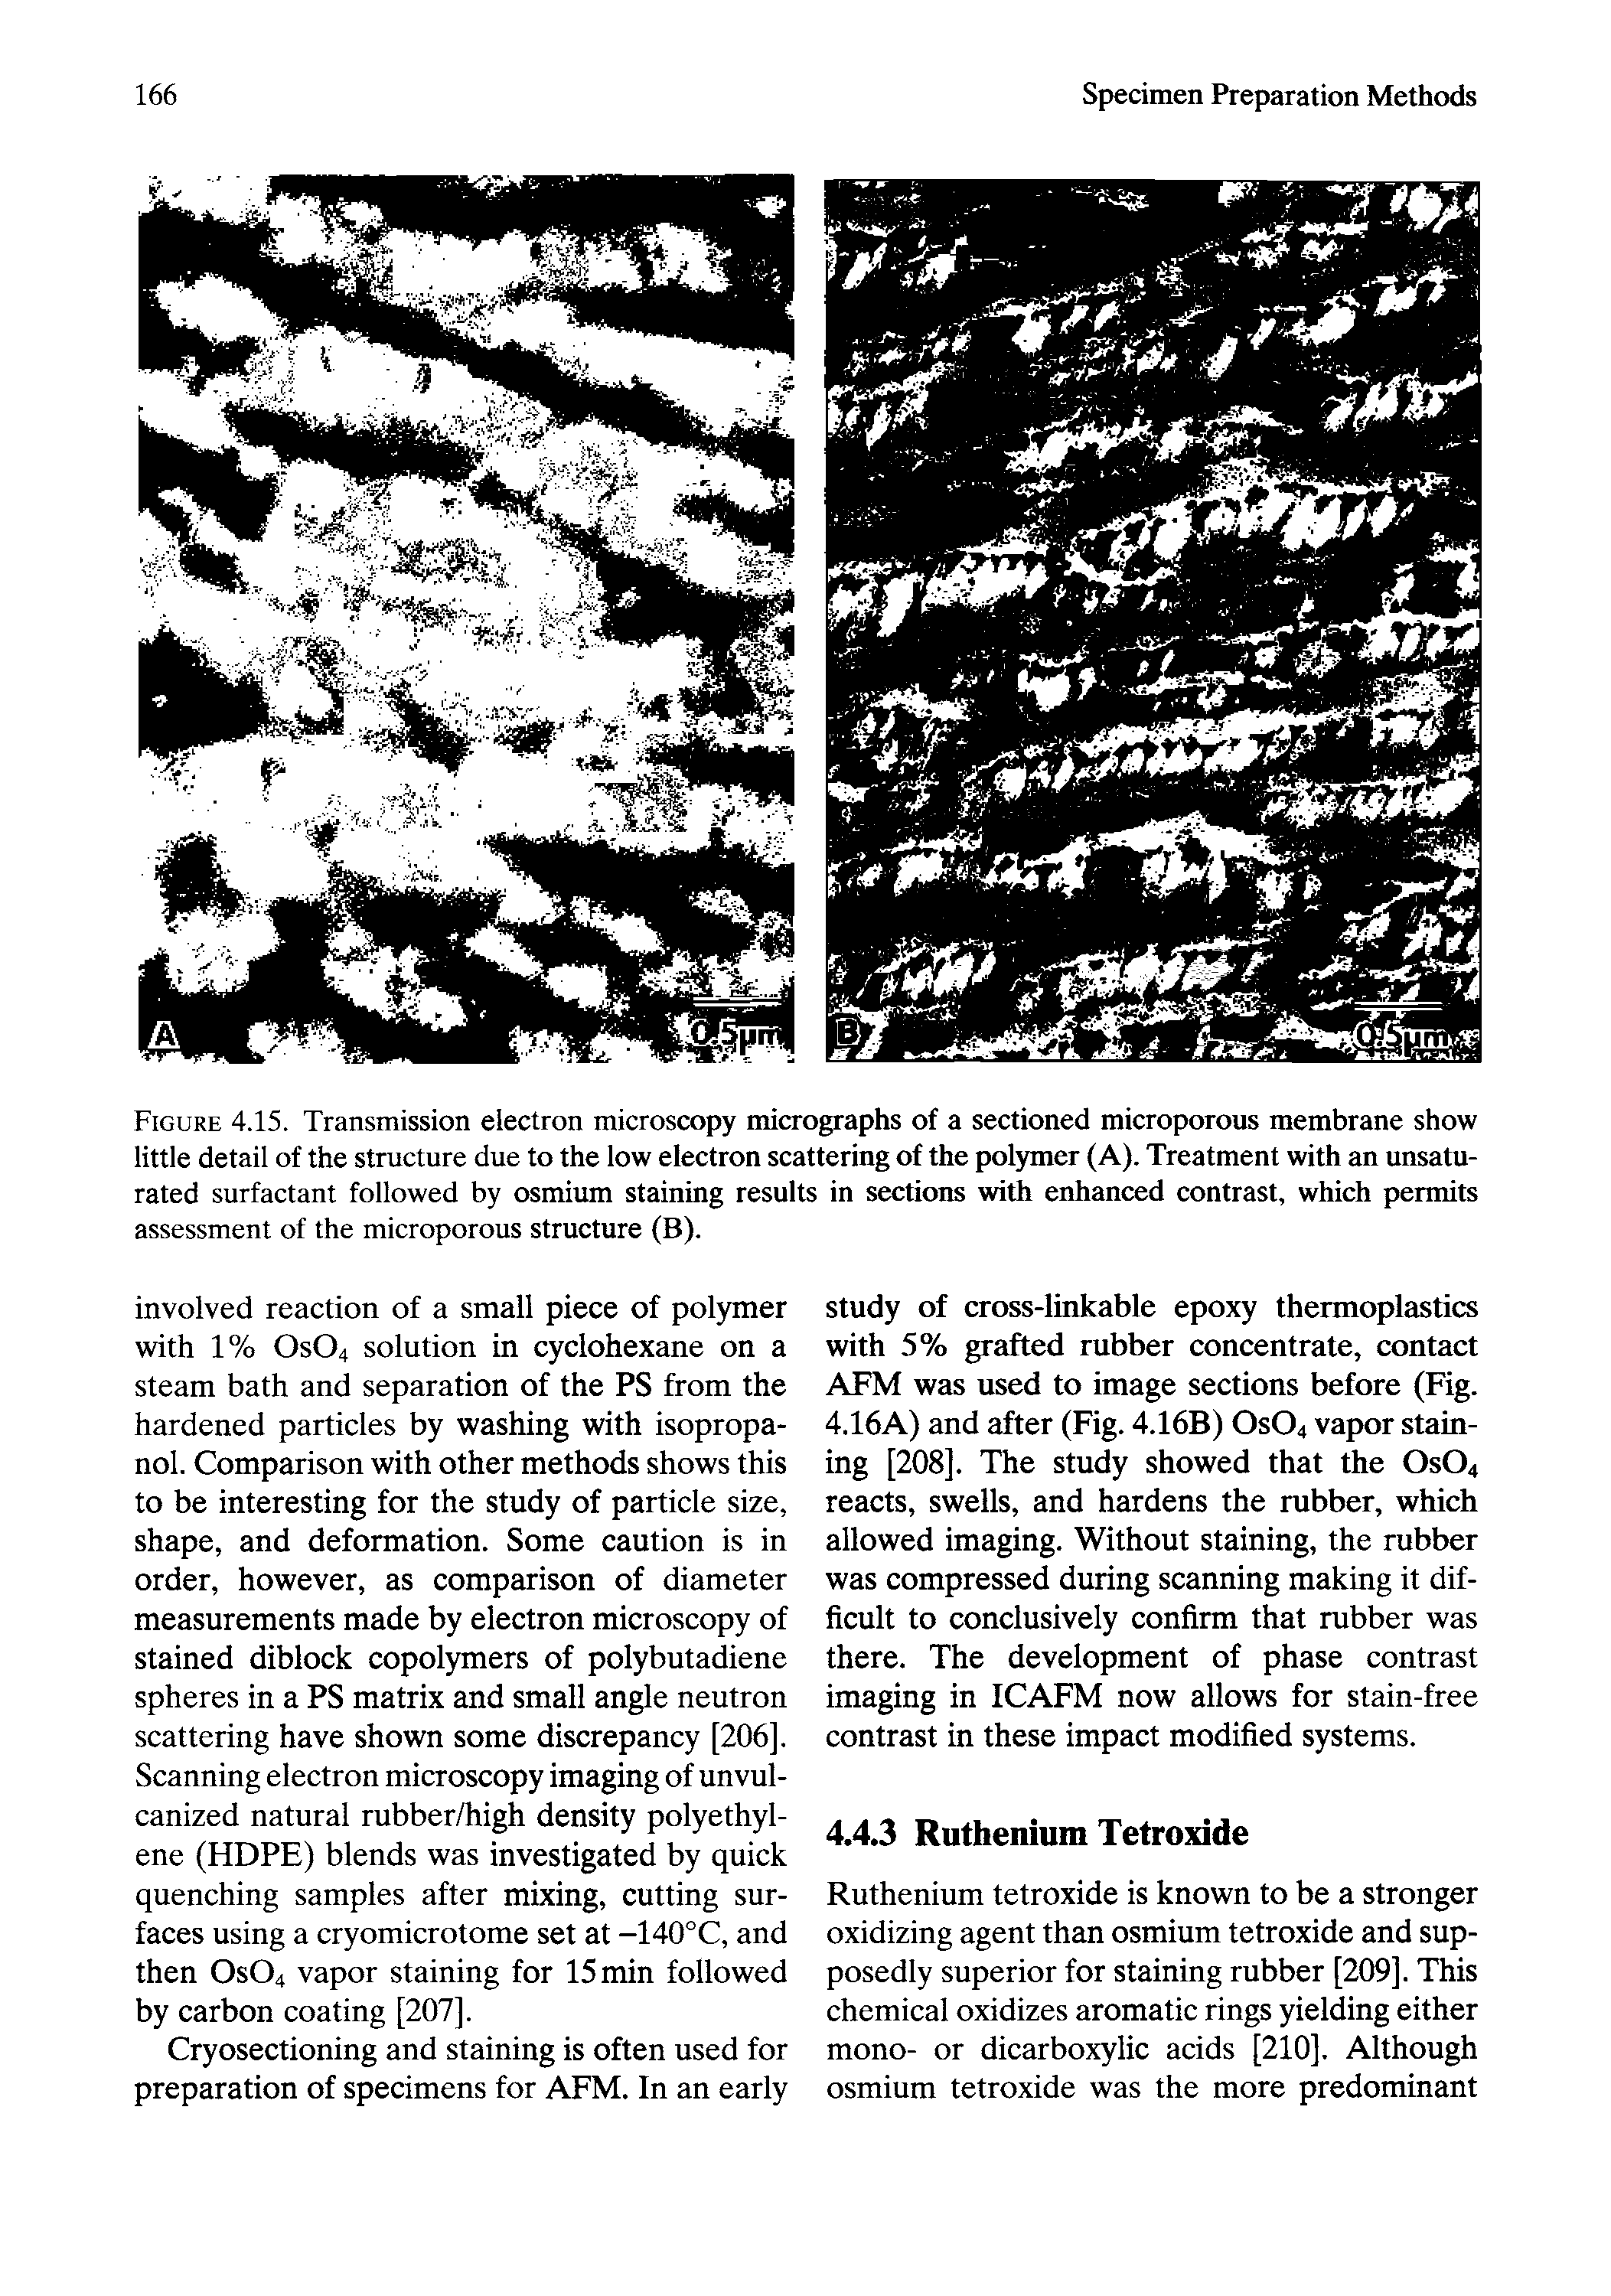 Figure 4.15. Transmission electron microscopy micrographs of a sectioned microporous membrane show little detail of the structure due to the low electron scattering of the polymer (A). Treatment with an unsaturated surfactant followed by osmium staining results in sections with enhanced contrast, which permits...